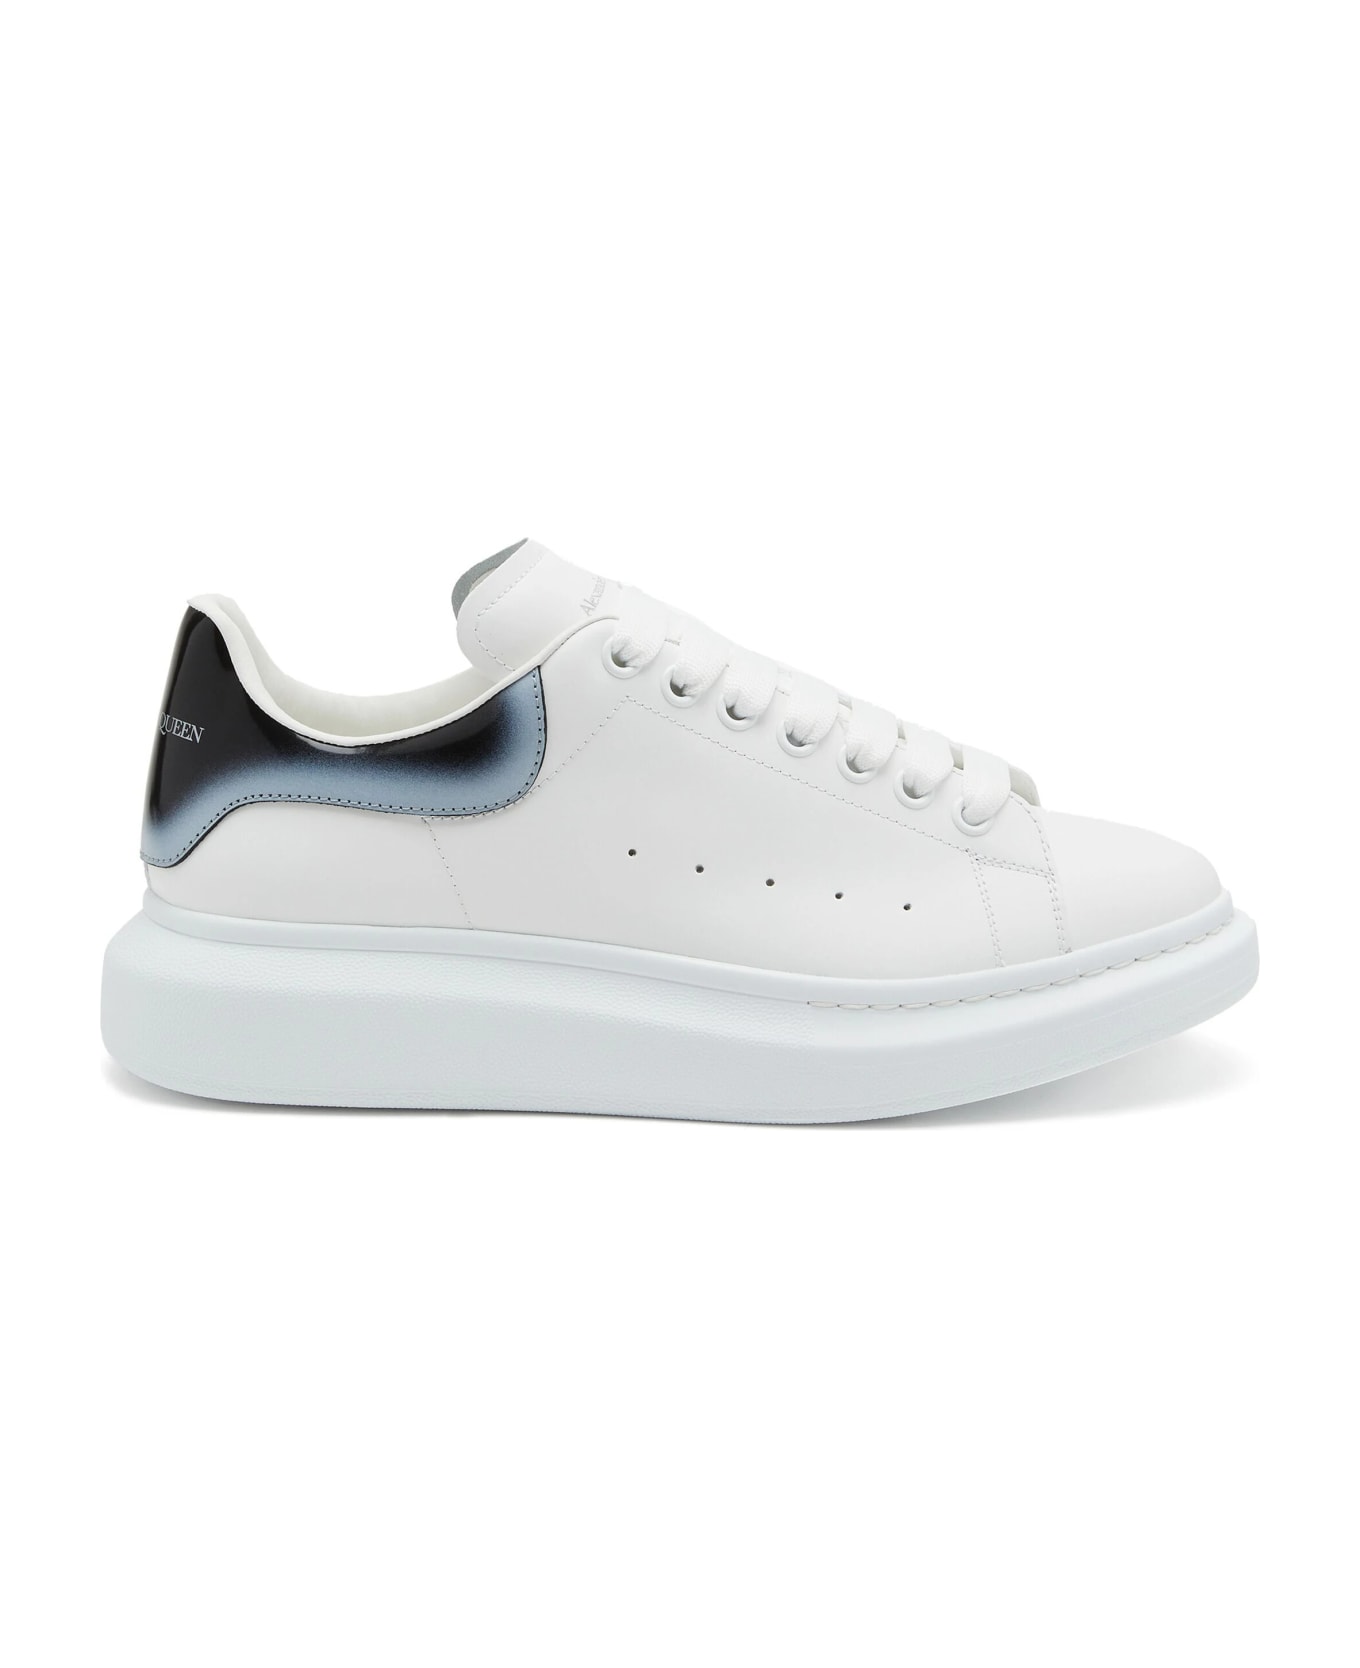 Alexander McQueen Oversized Sneakers In White And Black - White